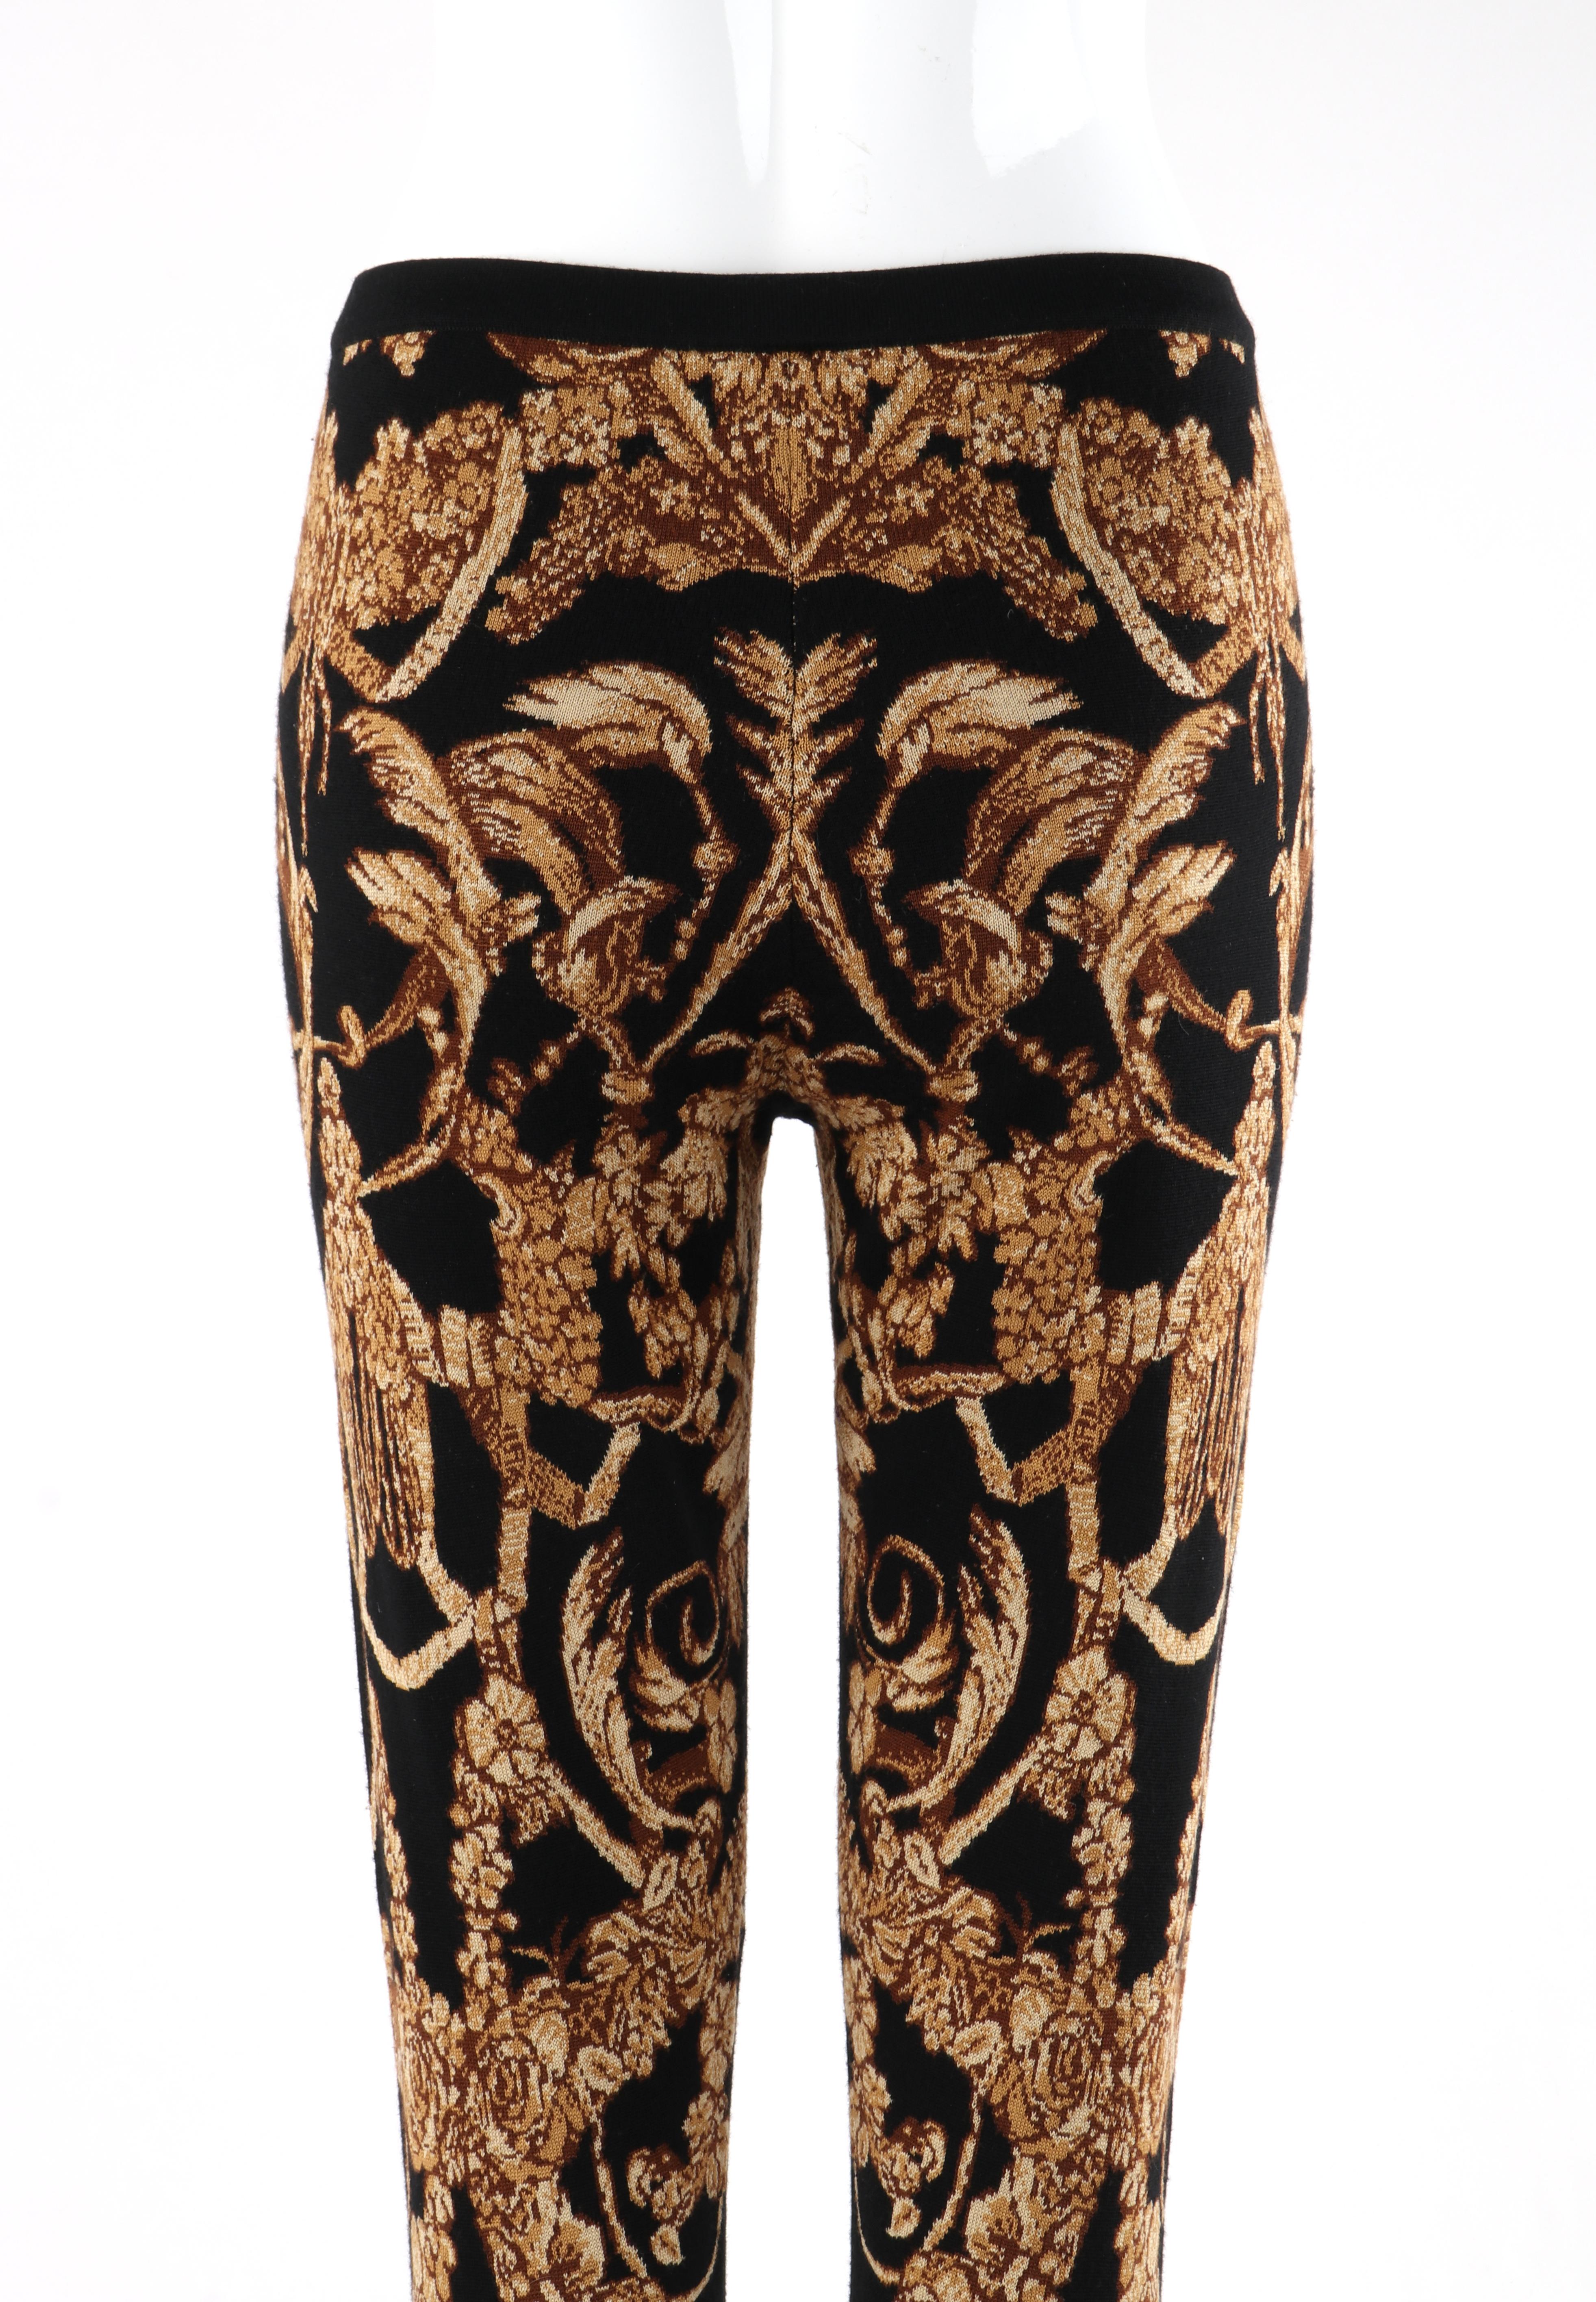 ALEXANDER McQUEEN A/W 2010 “Angels & Demons” Grinling Gibbons Knit Leggings In Excellent Condition For Sale In Thiensville, WI